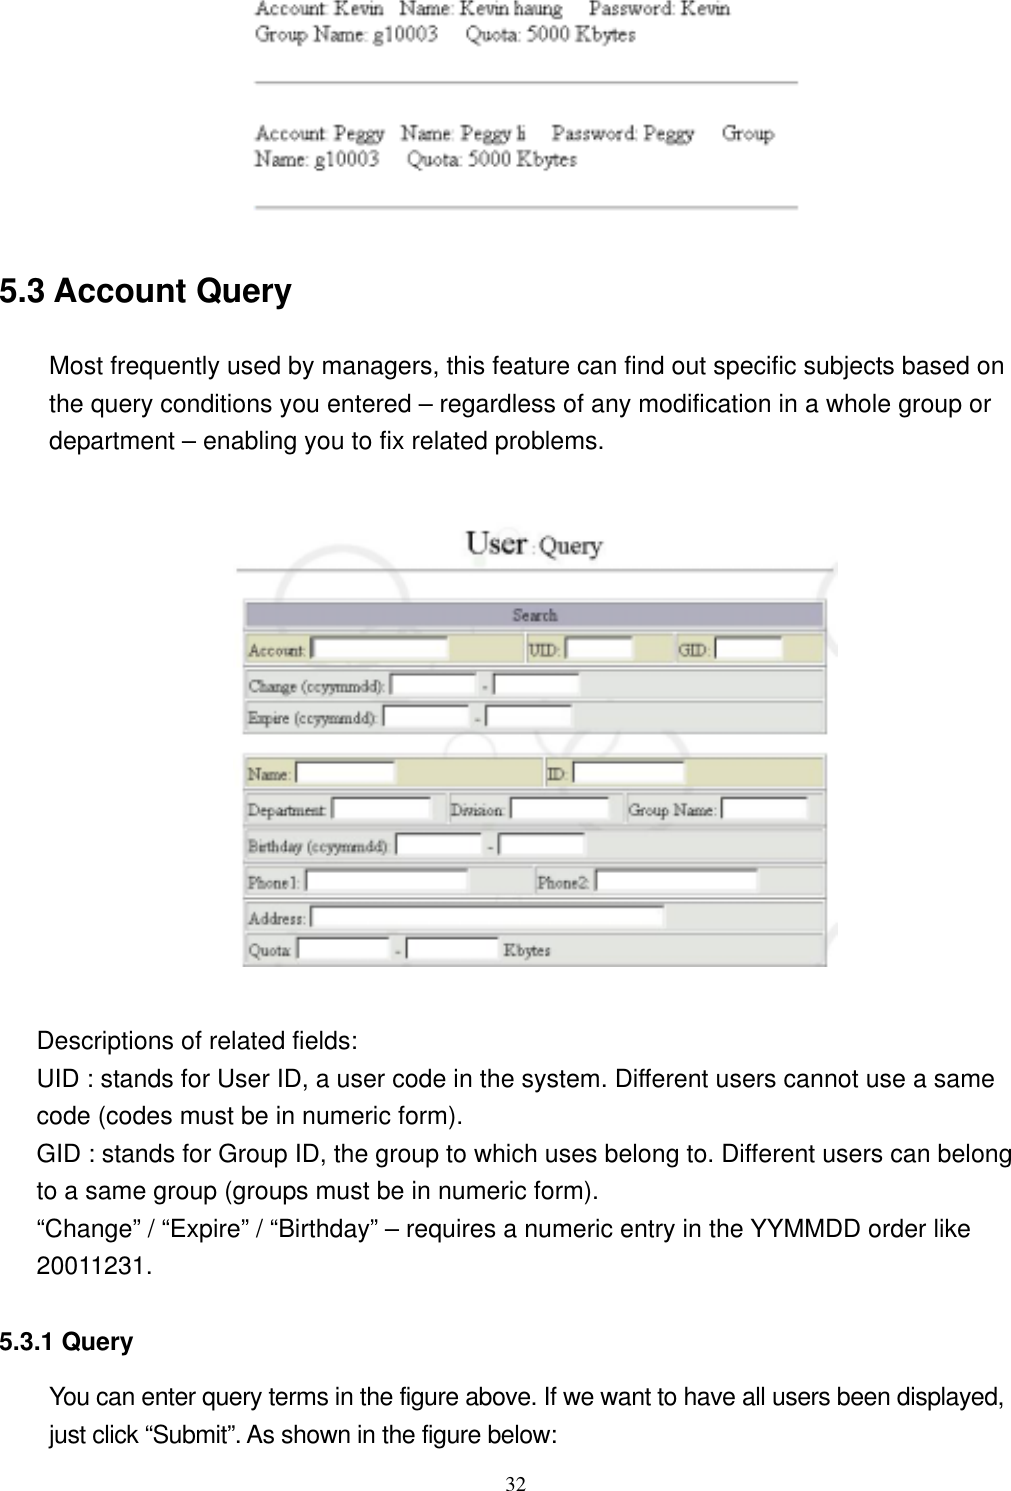  32 5.3 Account Query   Most frequently used by managers, this feature can find out specific subjects based on the query conditions you entered – regardless of any modification in a whole group or department – enabling you to fix related problems.      Descriptions of related fields: UID : stands for User ID, a user code in the system. Different users cannot use a same code (codes must be in numeric form). GID : stands for Group ID, the group to which uses belong to. Different users can belong to a same group (groups must be in numeric form). “Change” / “Expire” / “Birthday” – requires a numeric entry in the YYMMDD order like 20011231.   5.3.1 Query You can enter query terms in the figure above. If we want to have all users been displayed, just click “Submit”. As shown in the figure below: 